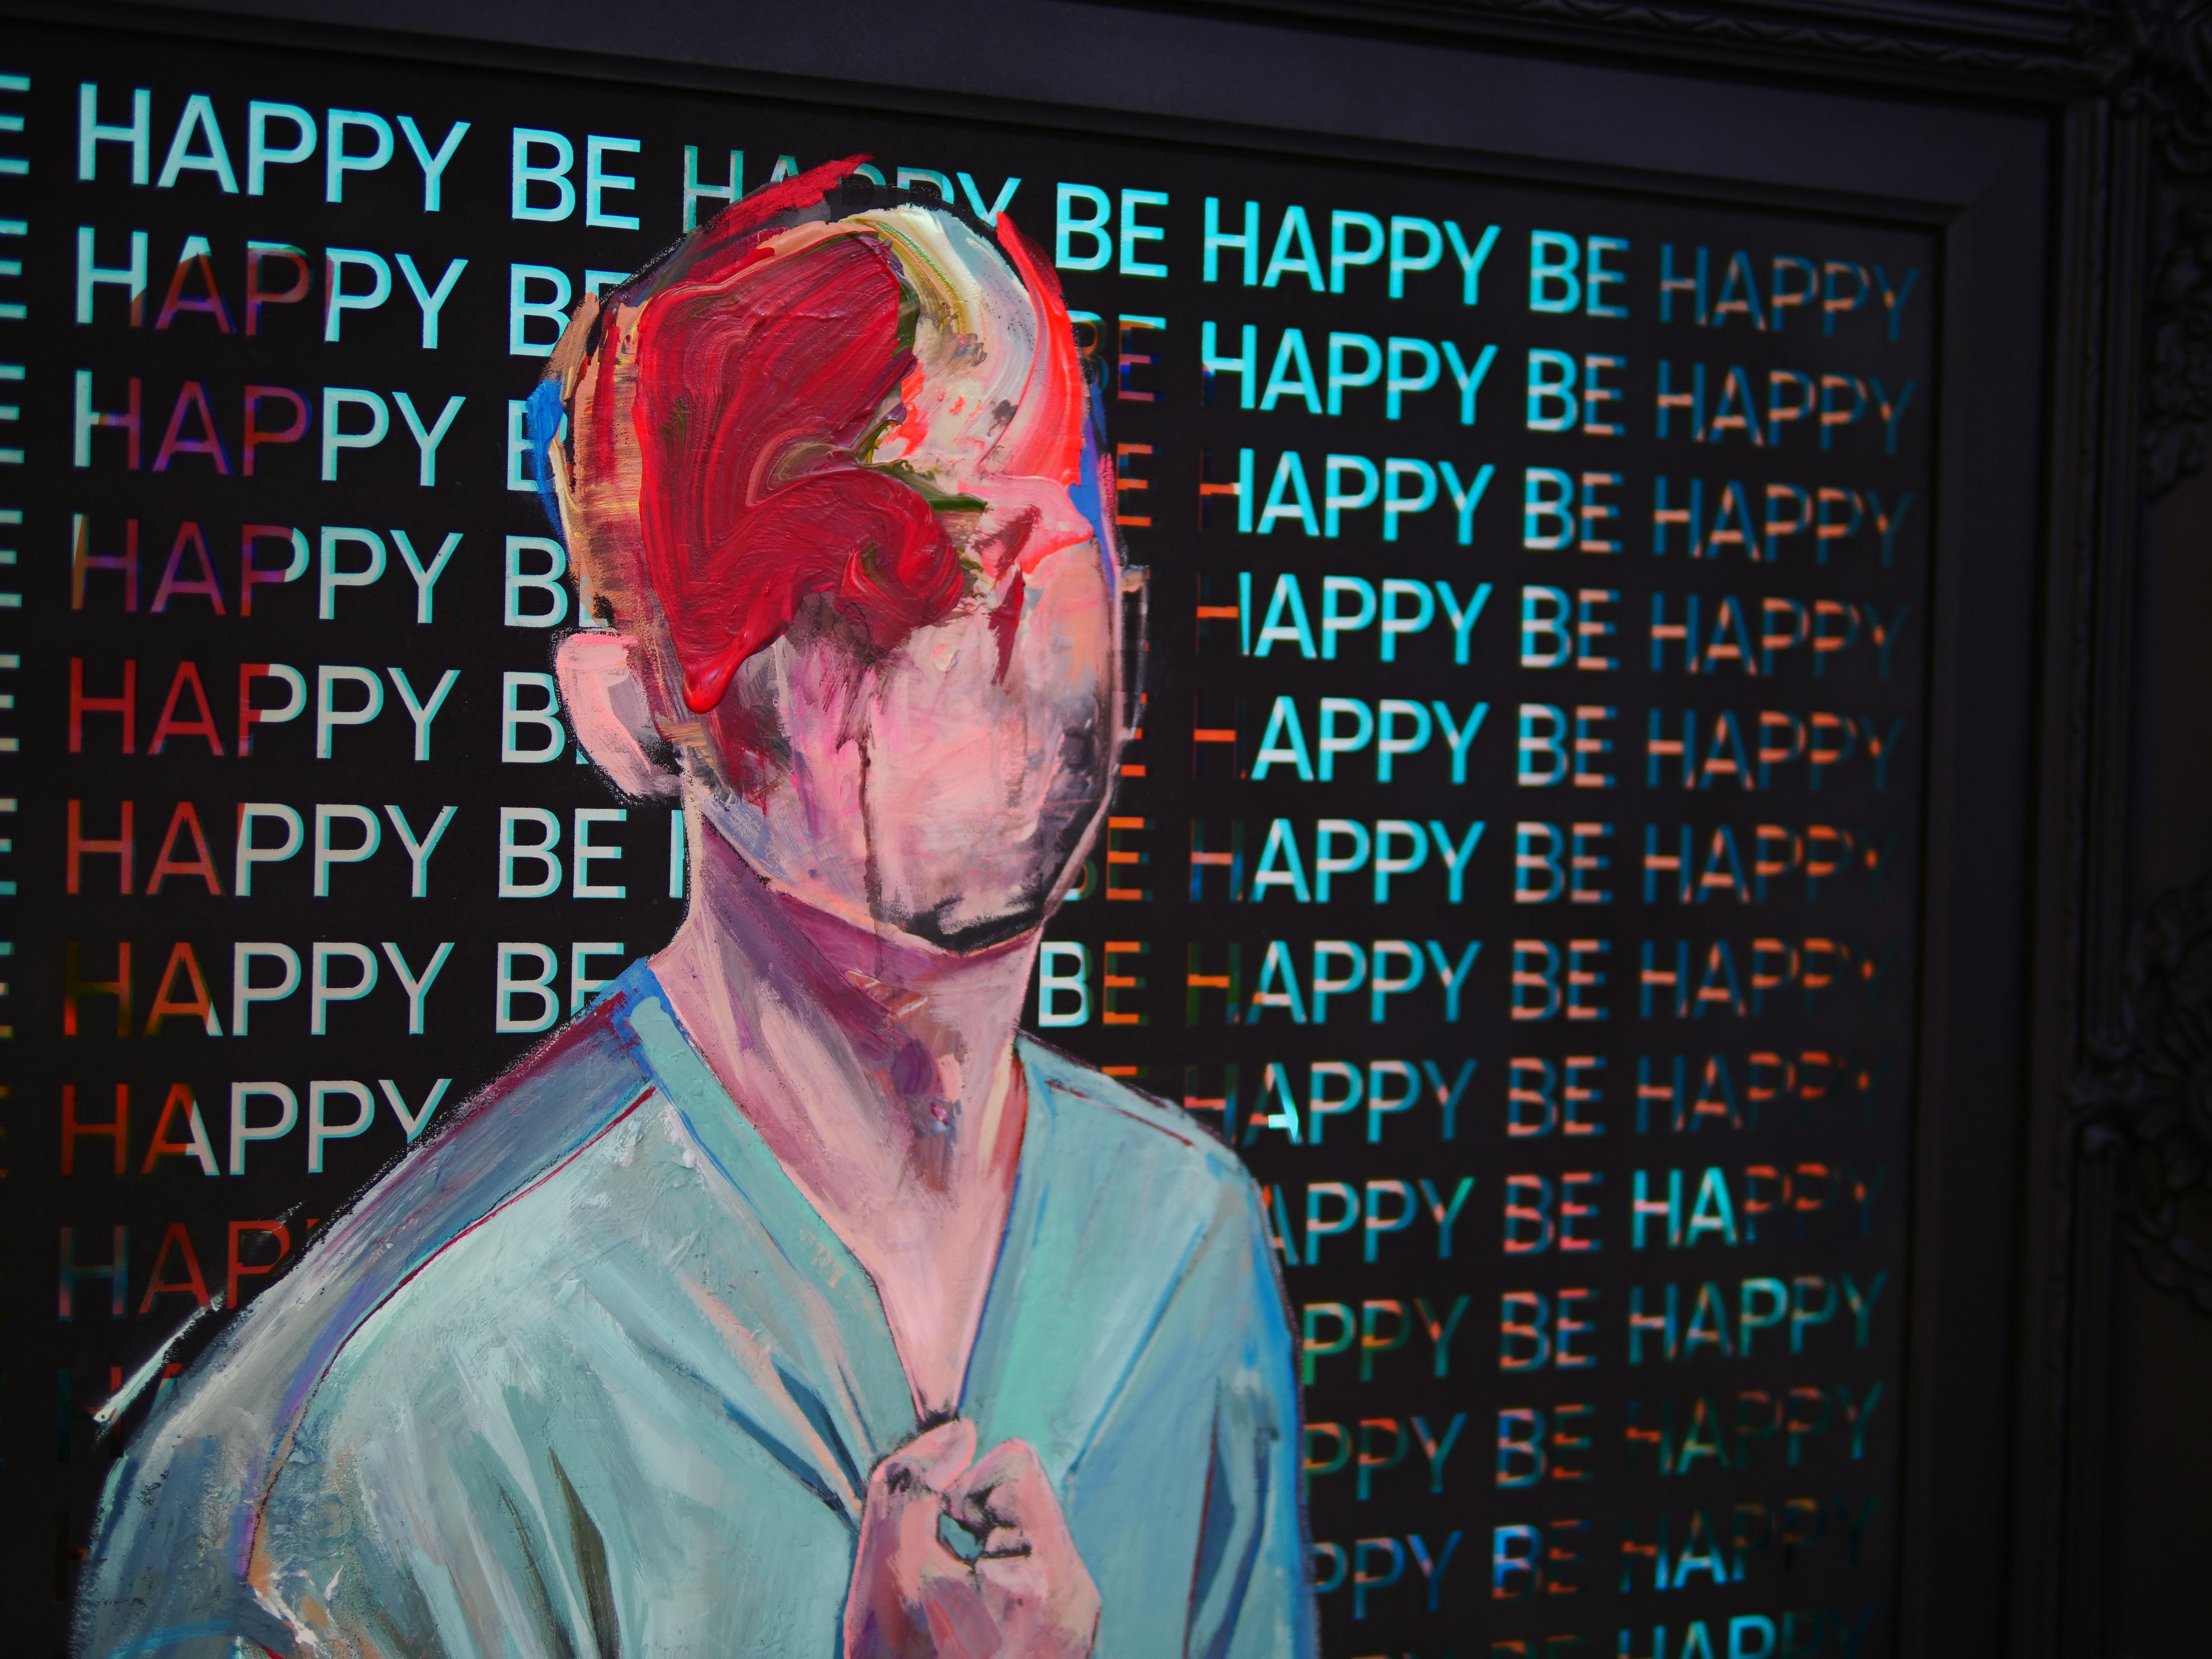 Happiness [ordinary person 84] - Contemporary Mixed Media Art by Hee Jin Ahn 안희진